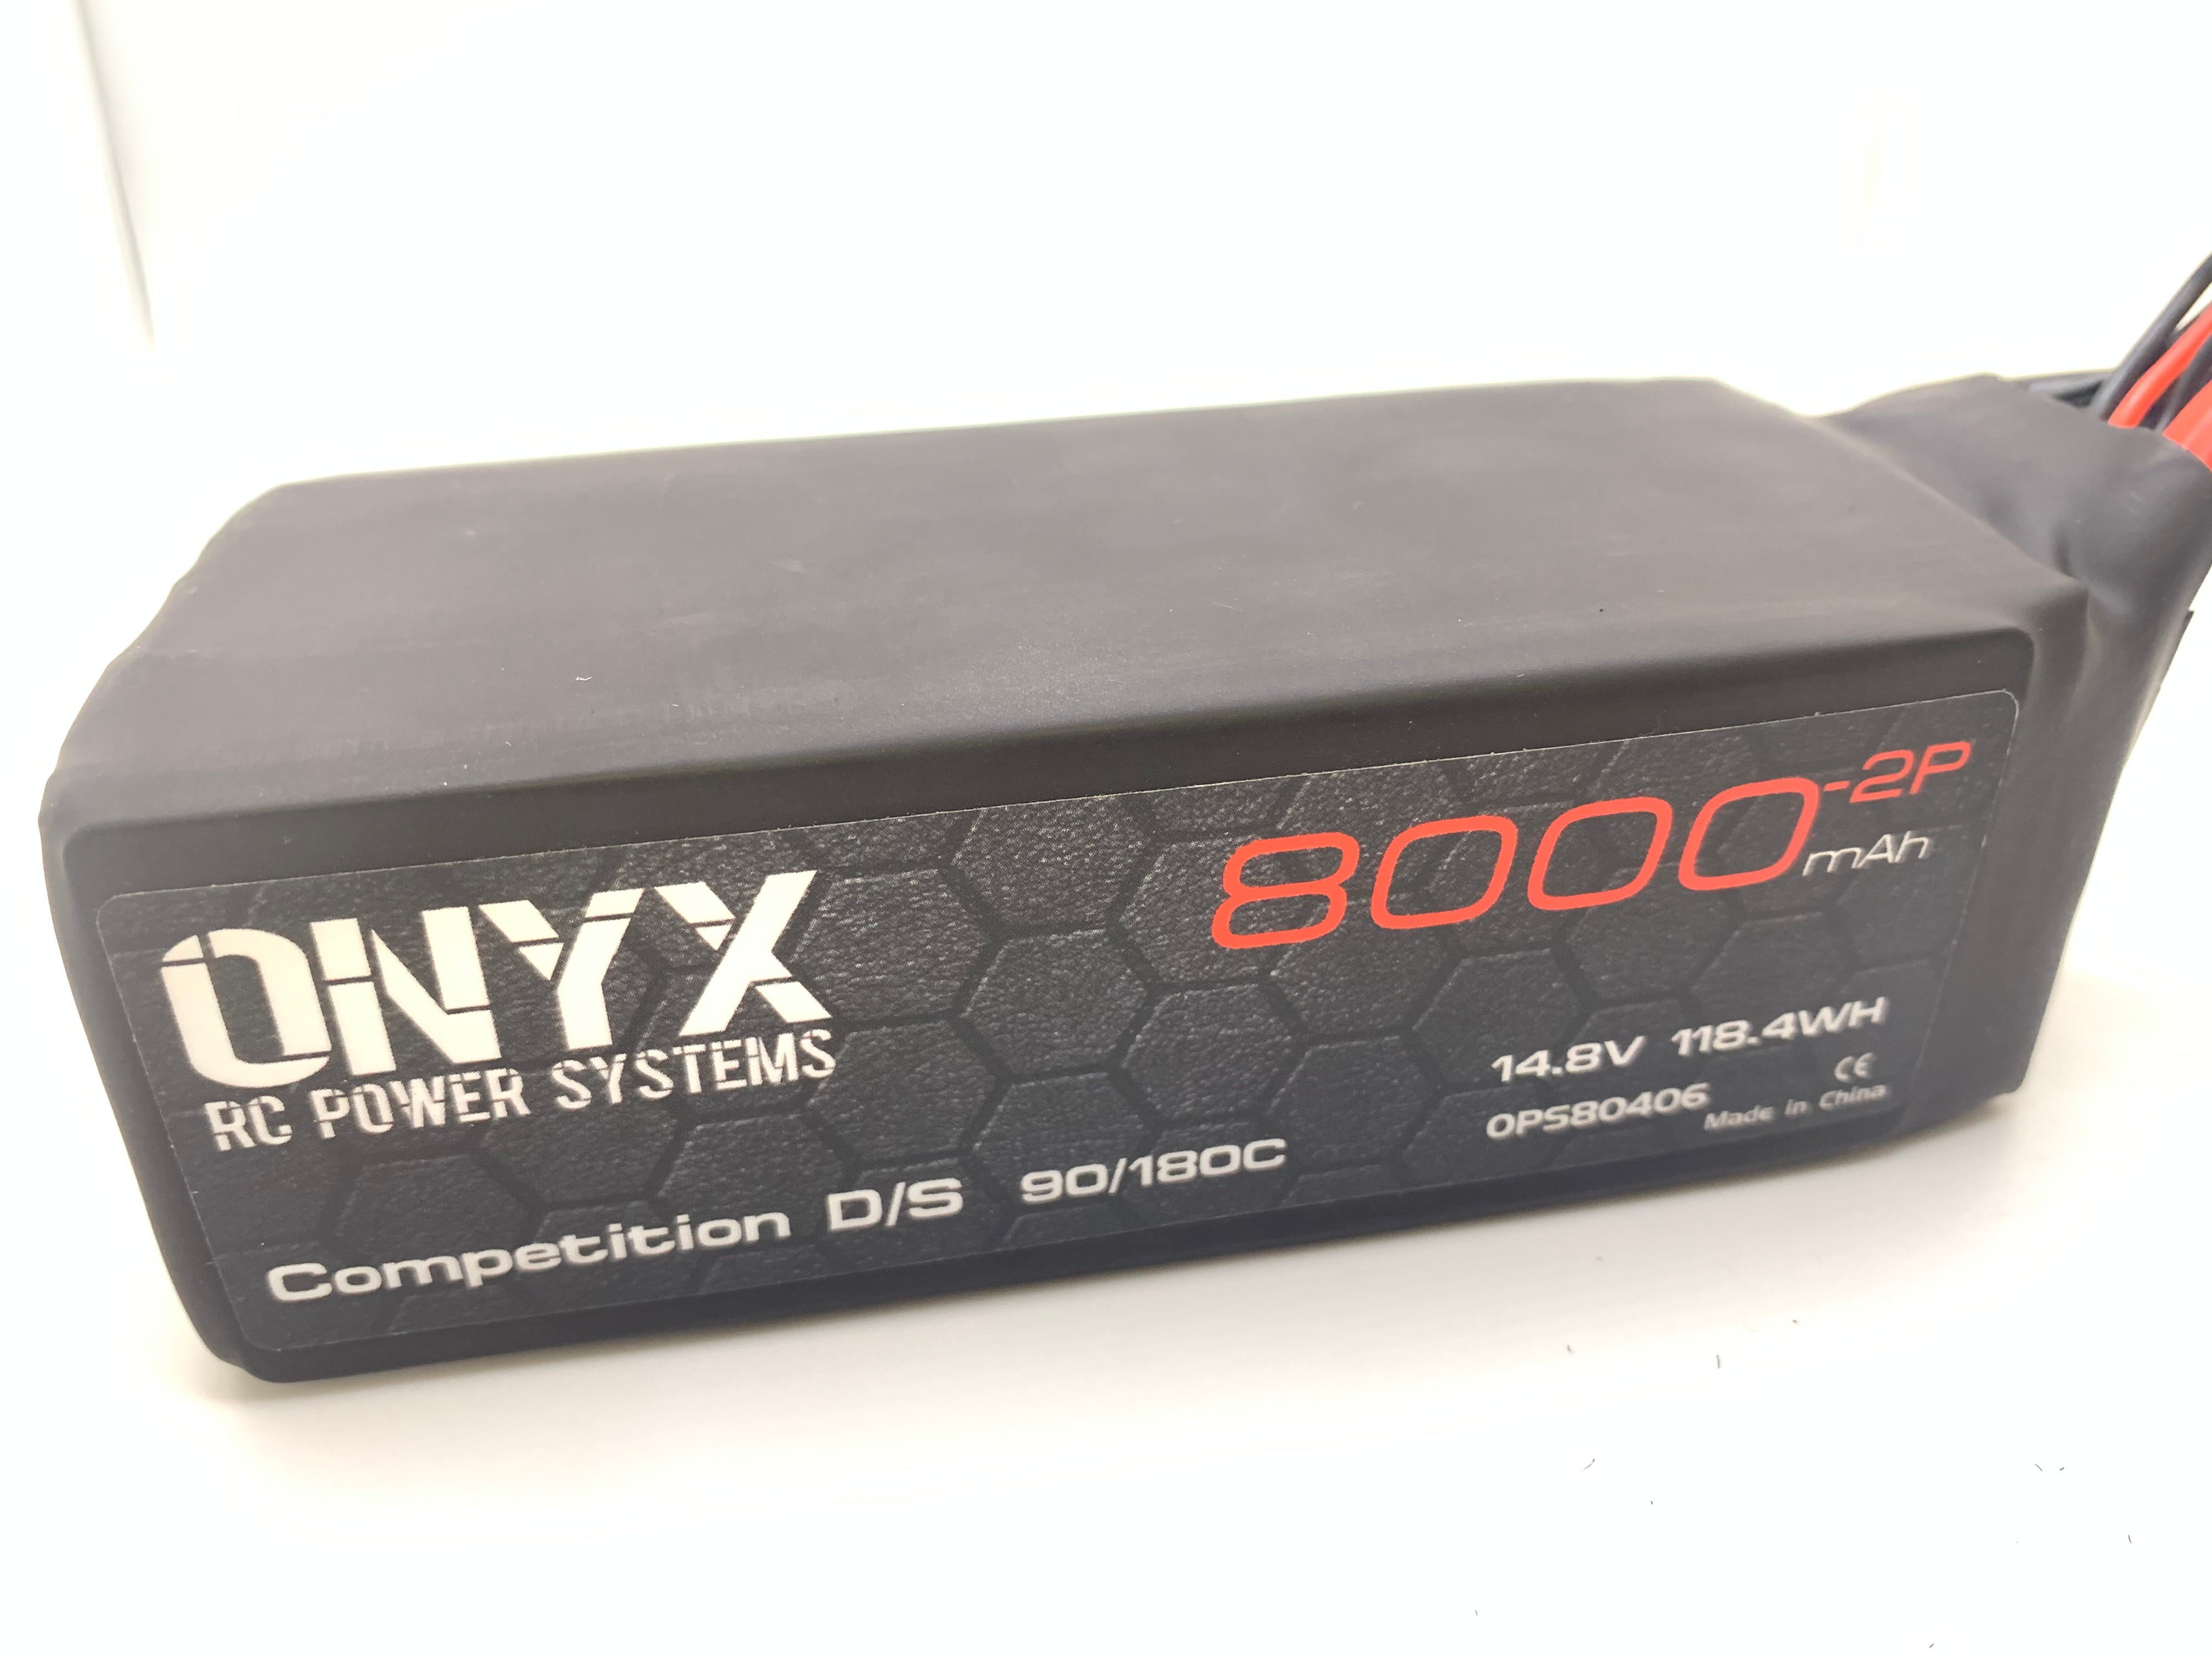 O.P.S Speed & Drag – Onyx Rc Power Systems